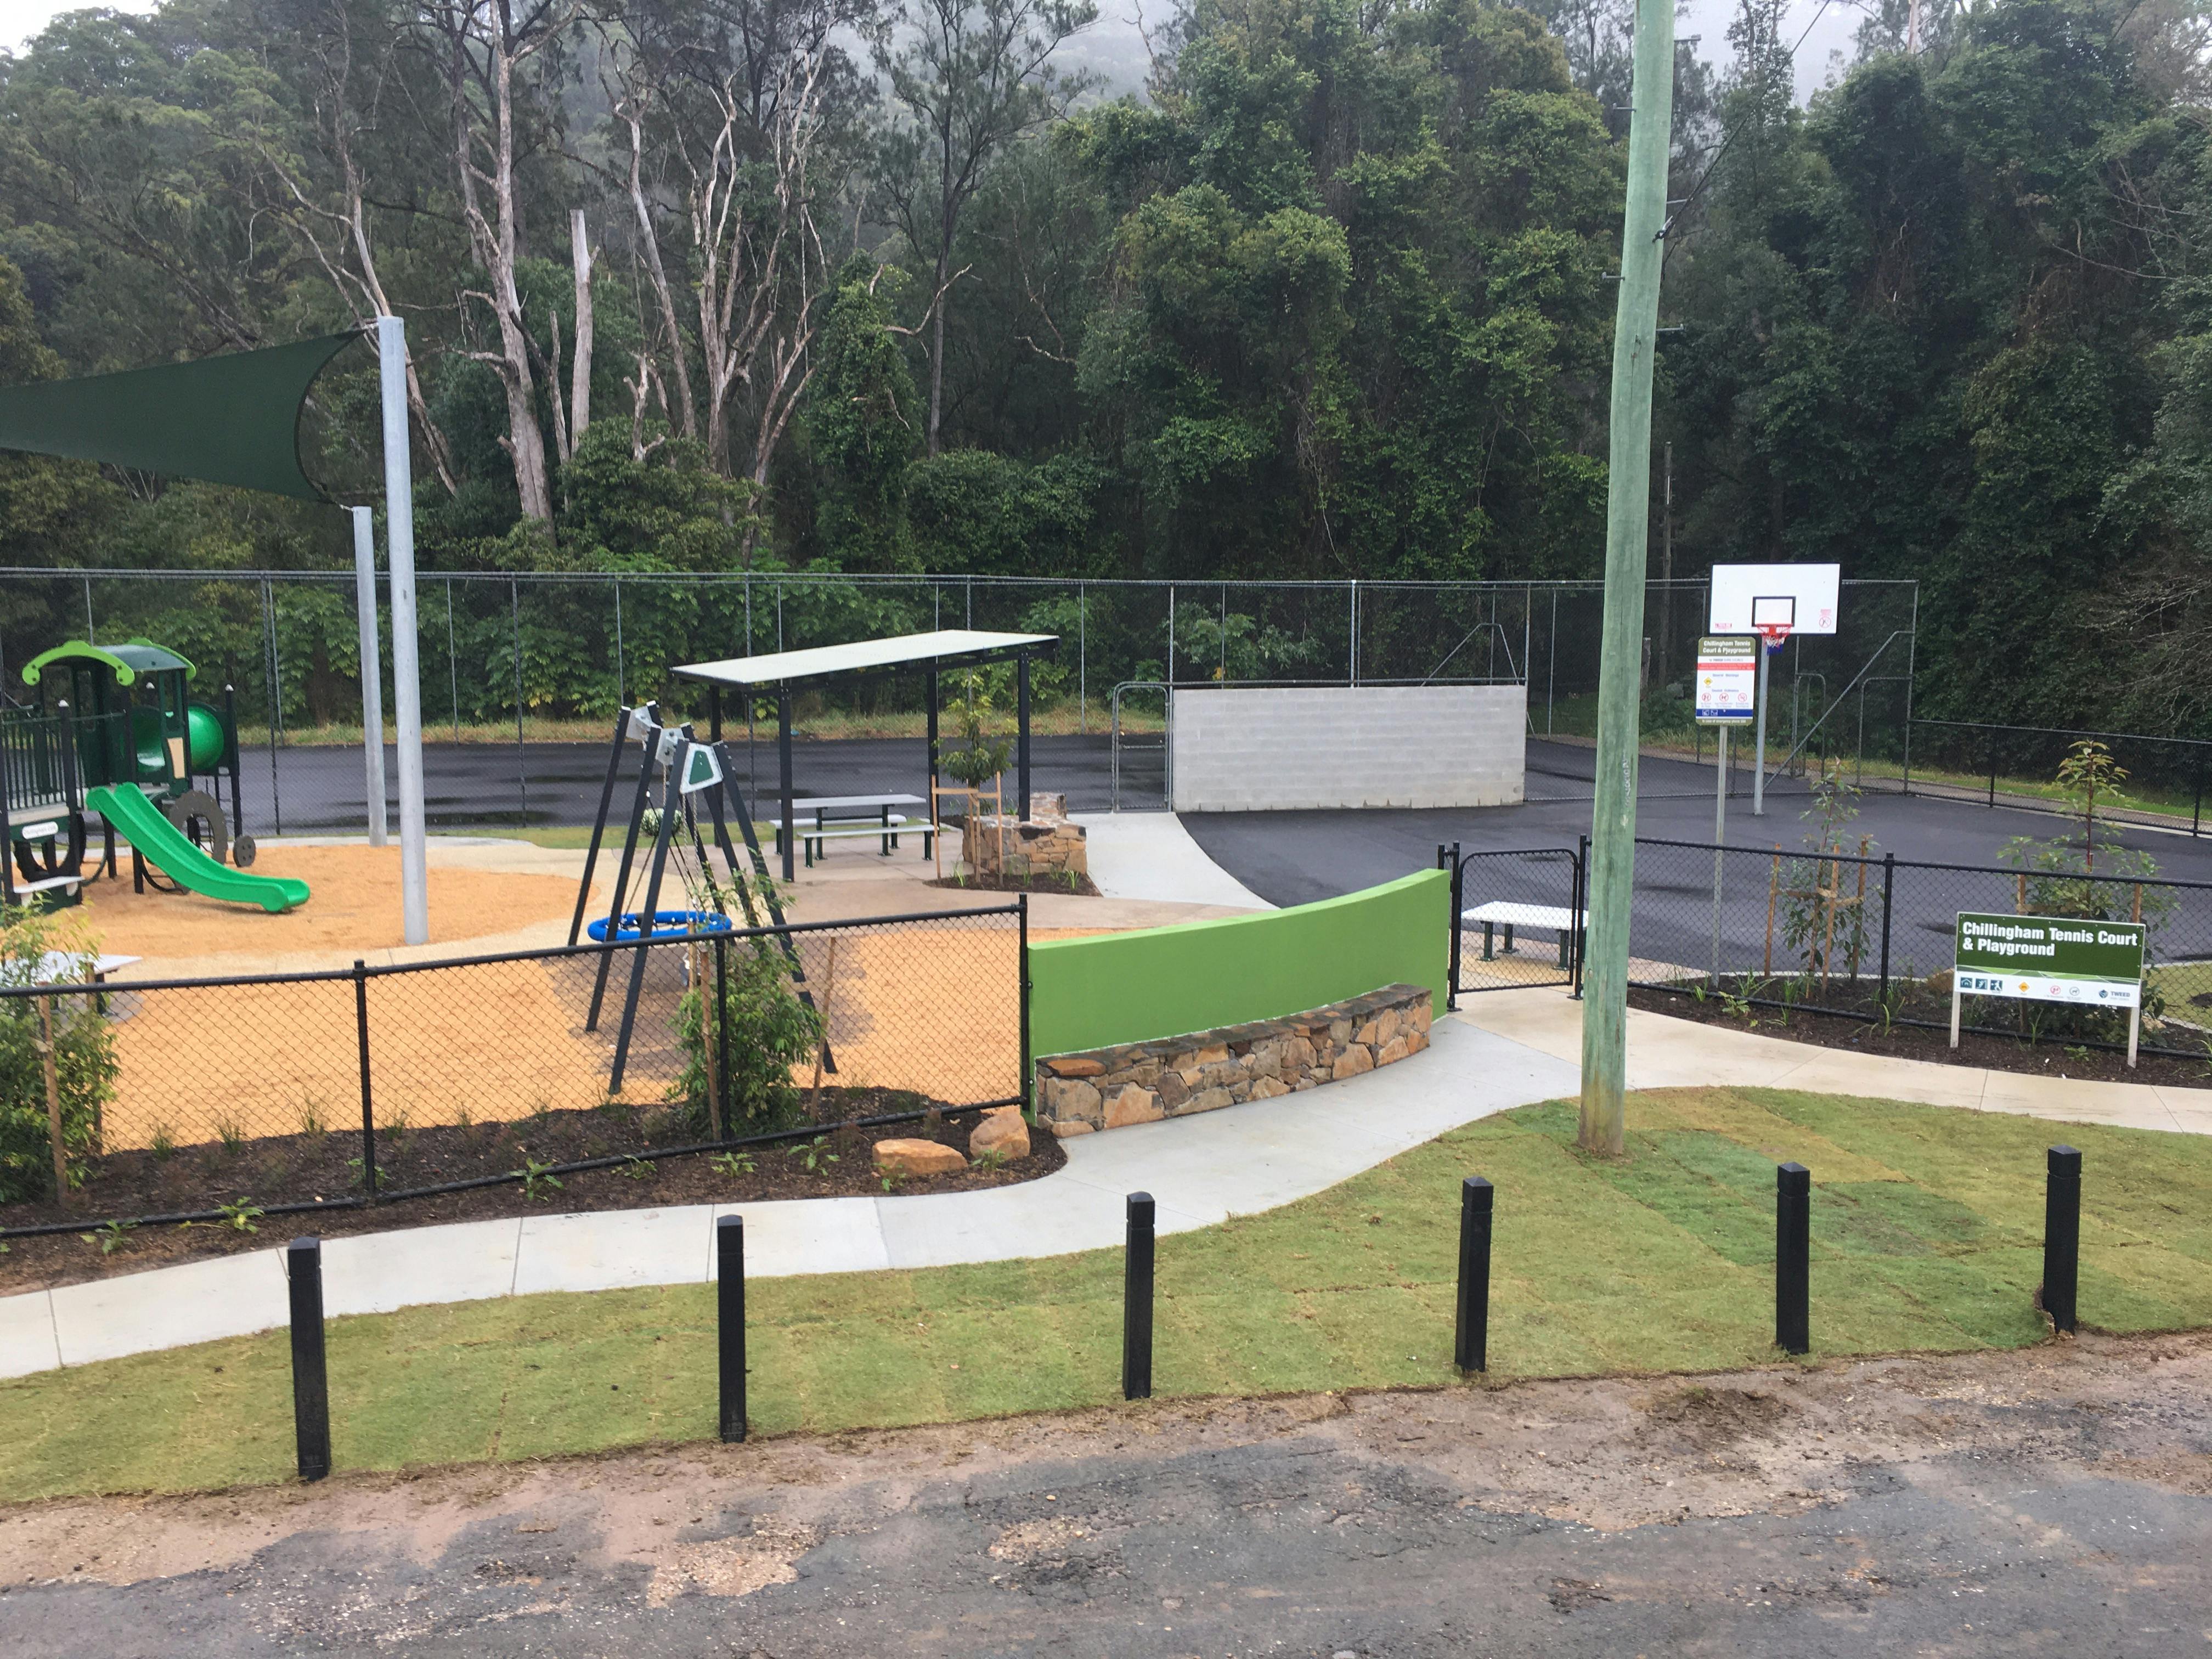 Chillingham Tennis courts and playground - completed project